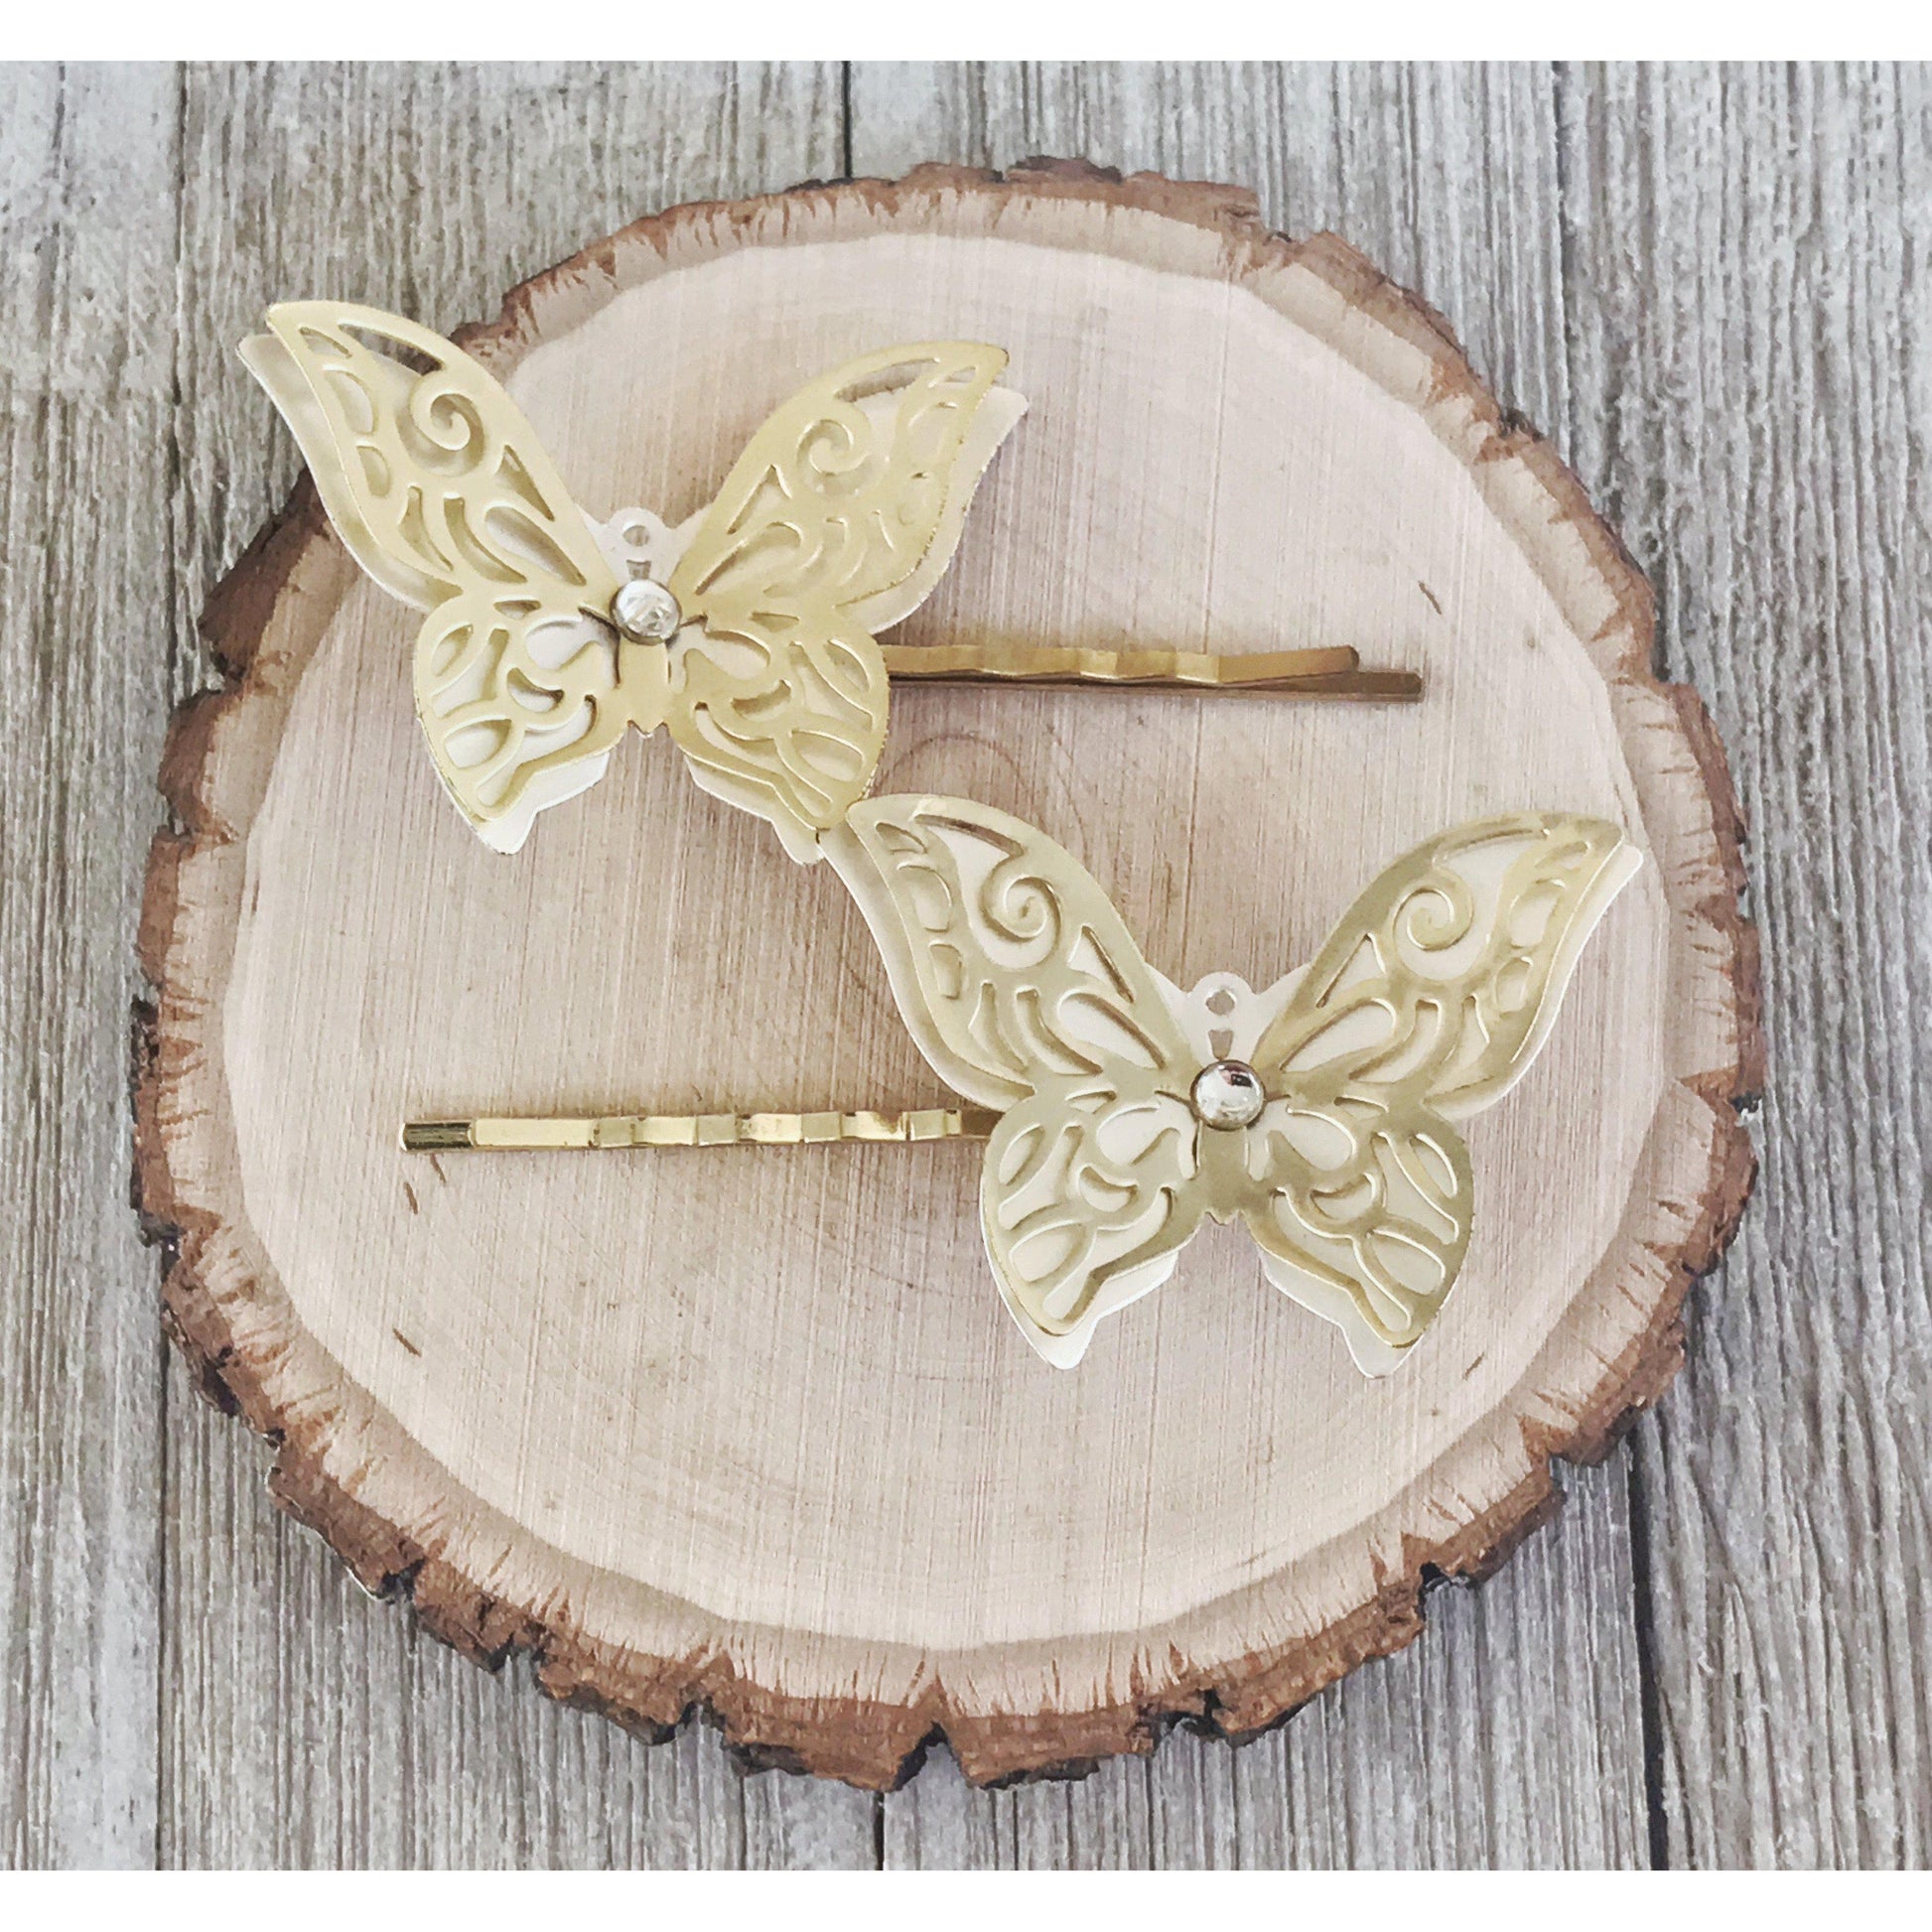 Gold & Silver Filigree Butterfly Hair Pins - Elegant Accessories for Stylish Hairdos